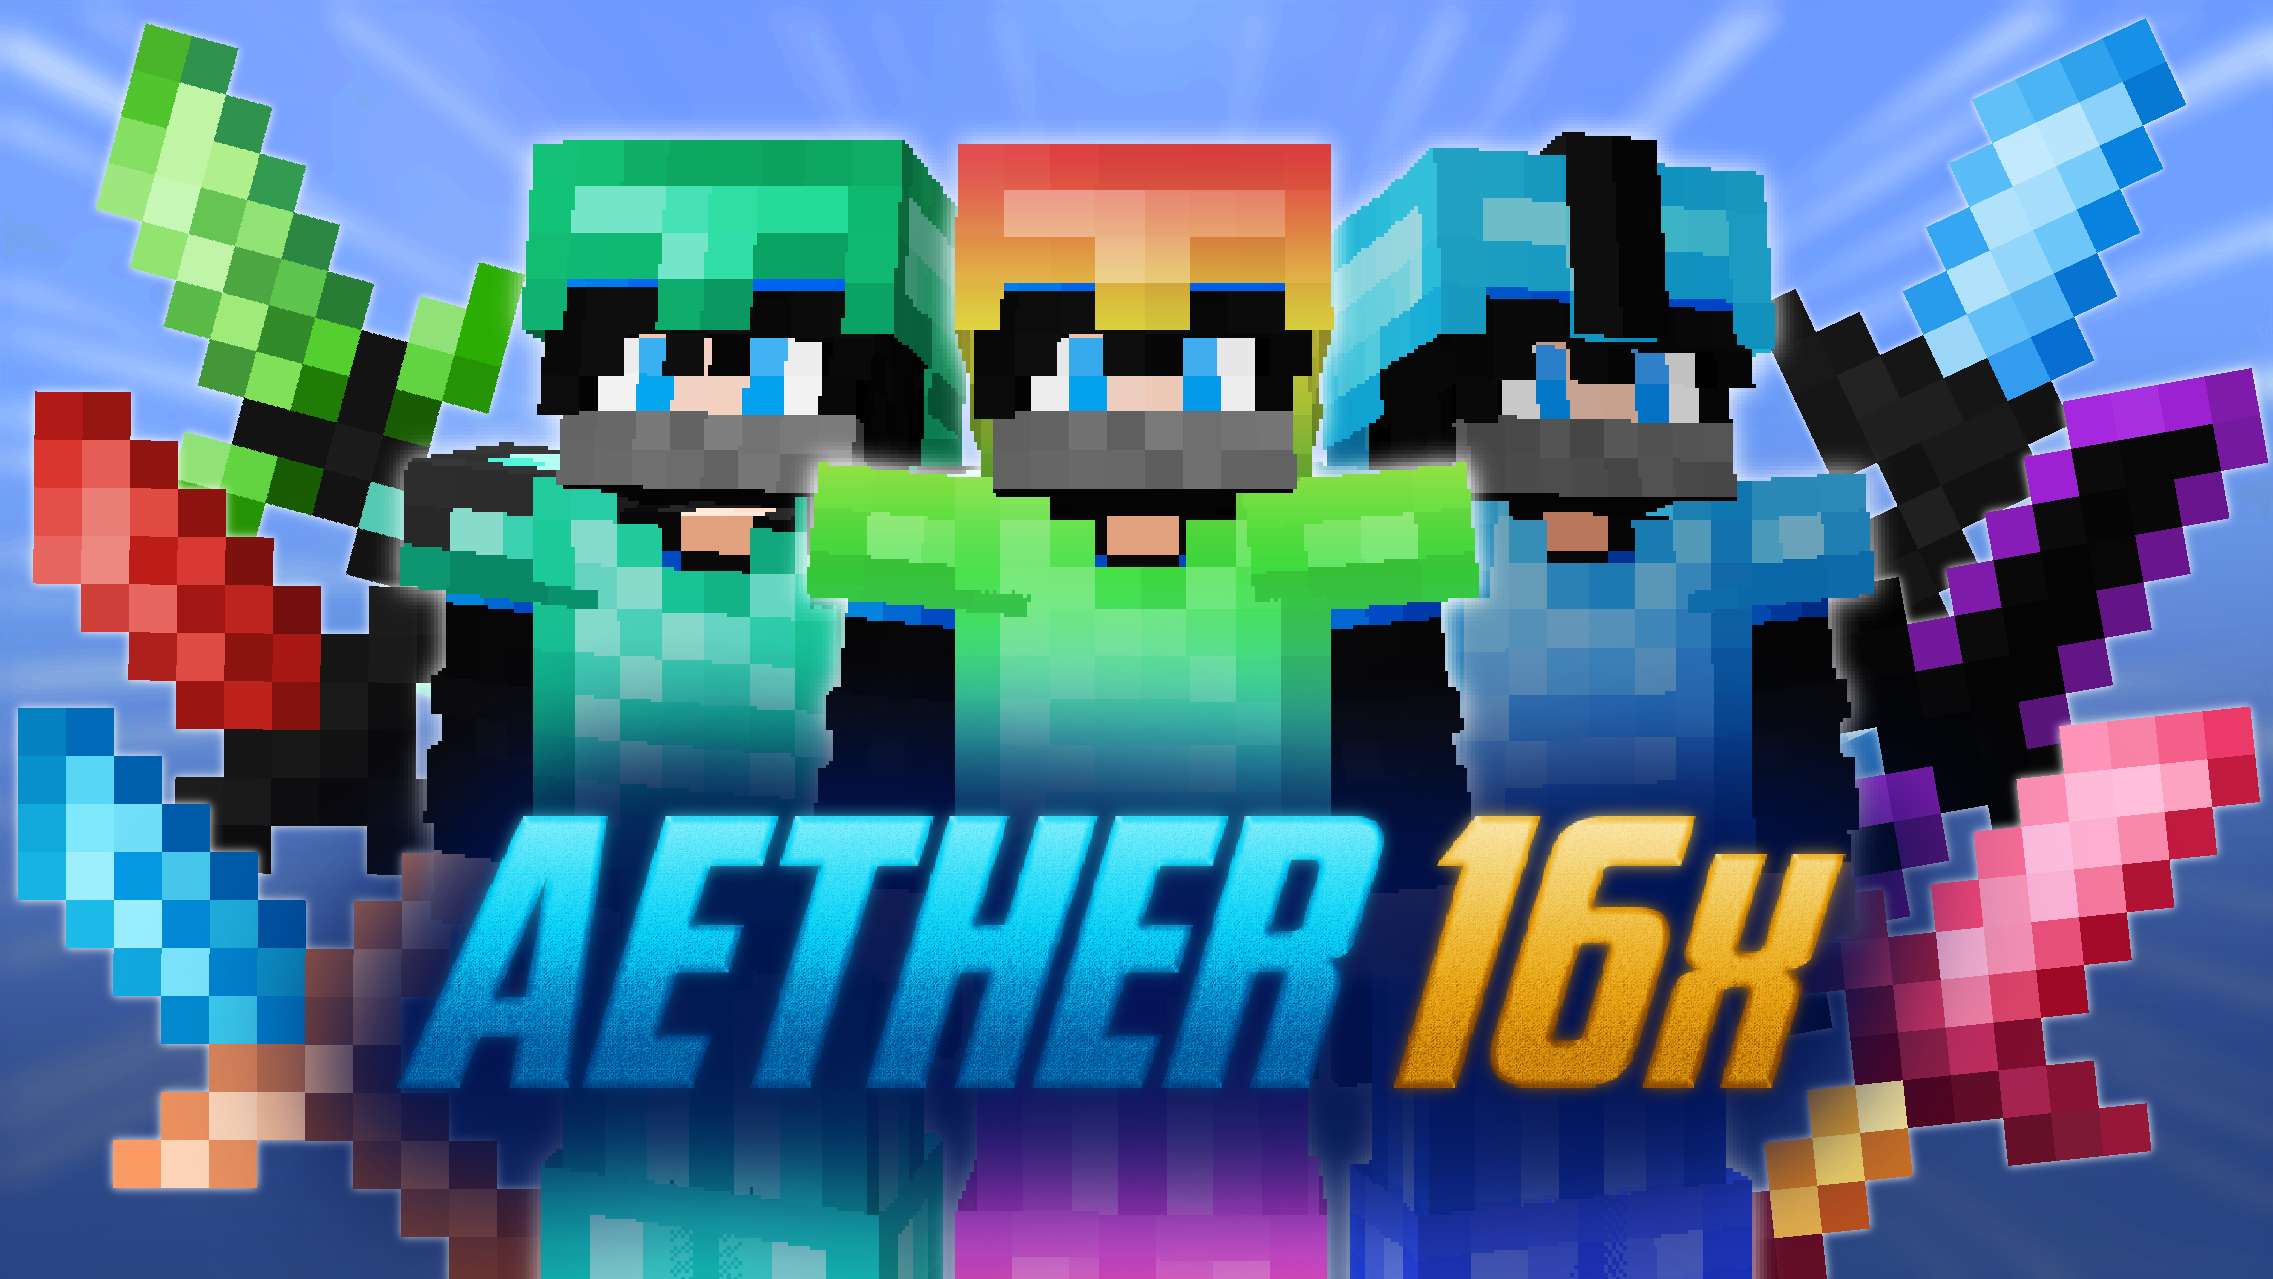 Aether 16x [BenBGamer] 16 by Mqryo on PvPRP